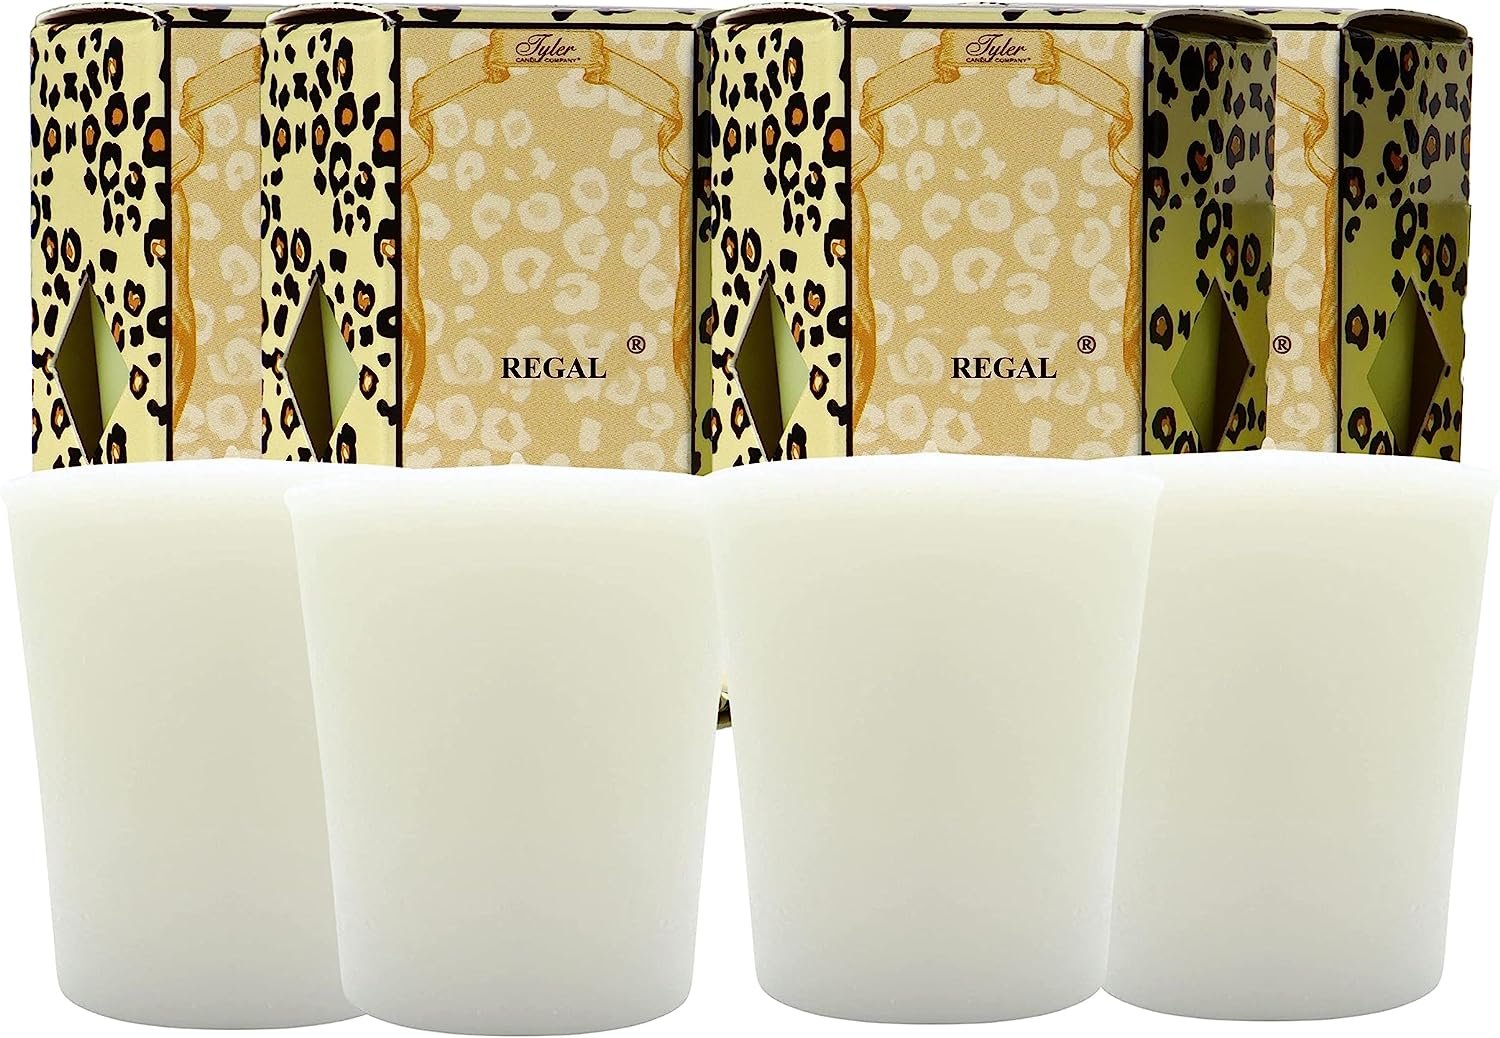 Tyler Candle Company Regal Votive Candles - Luxury Scented Candle with Essential Oils - 4 Pack of 2 oz Small Candles with 15 Hour Burn Time Each - with Bonus Key Chain